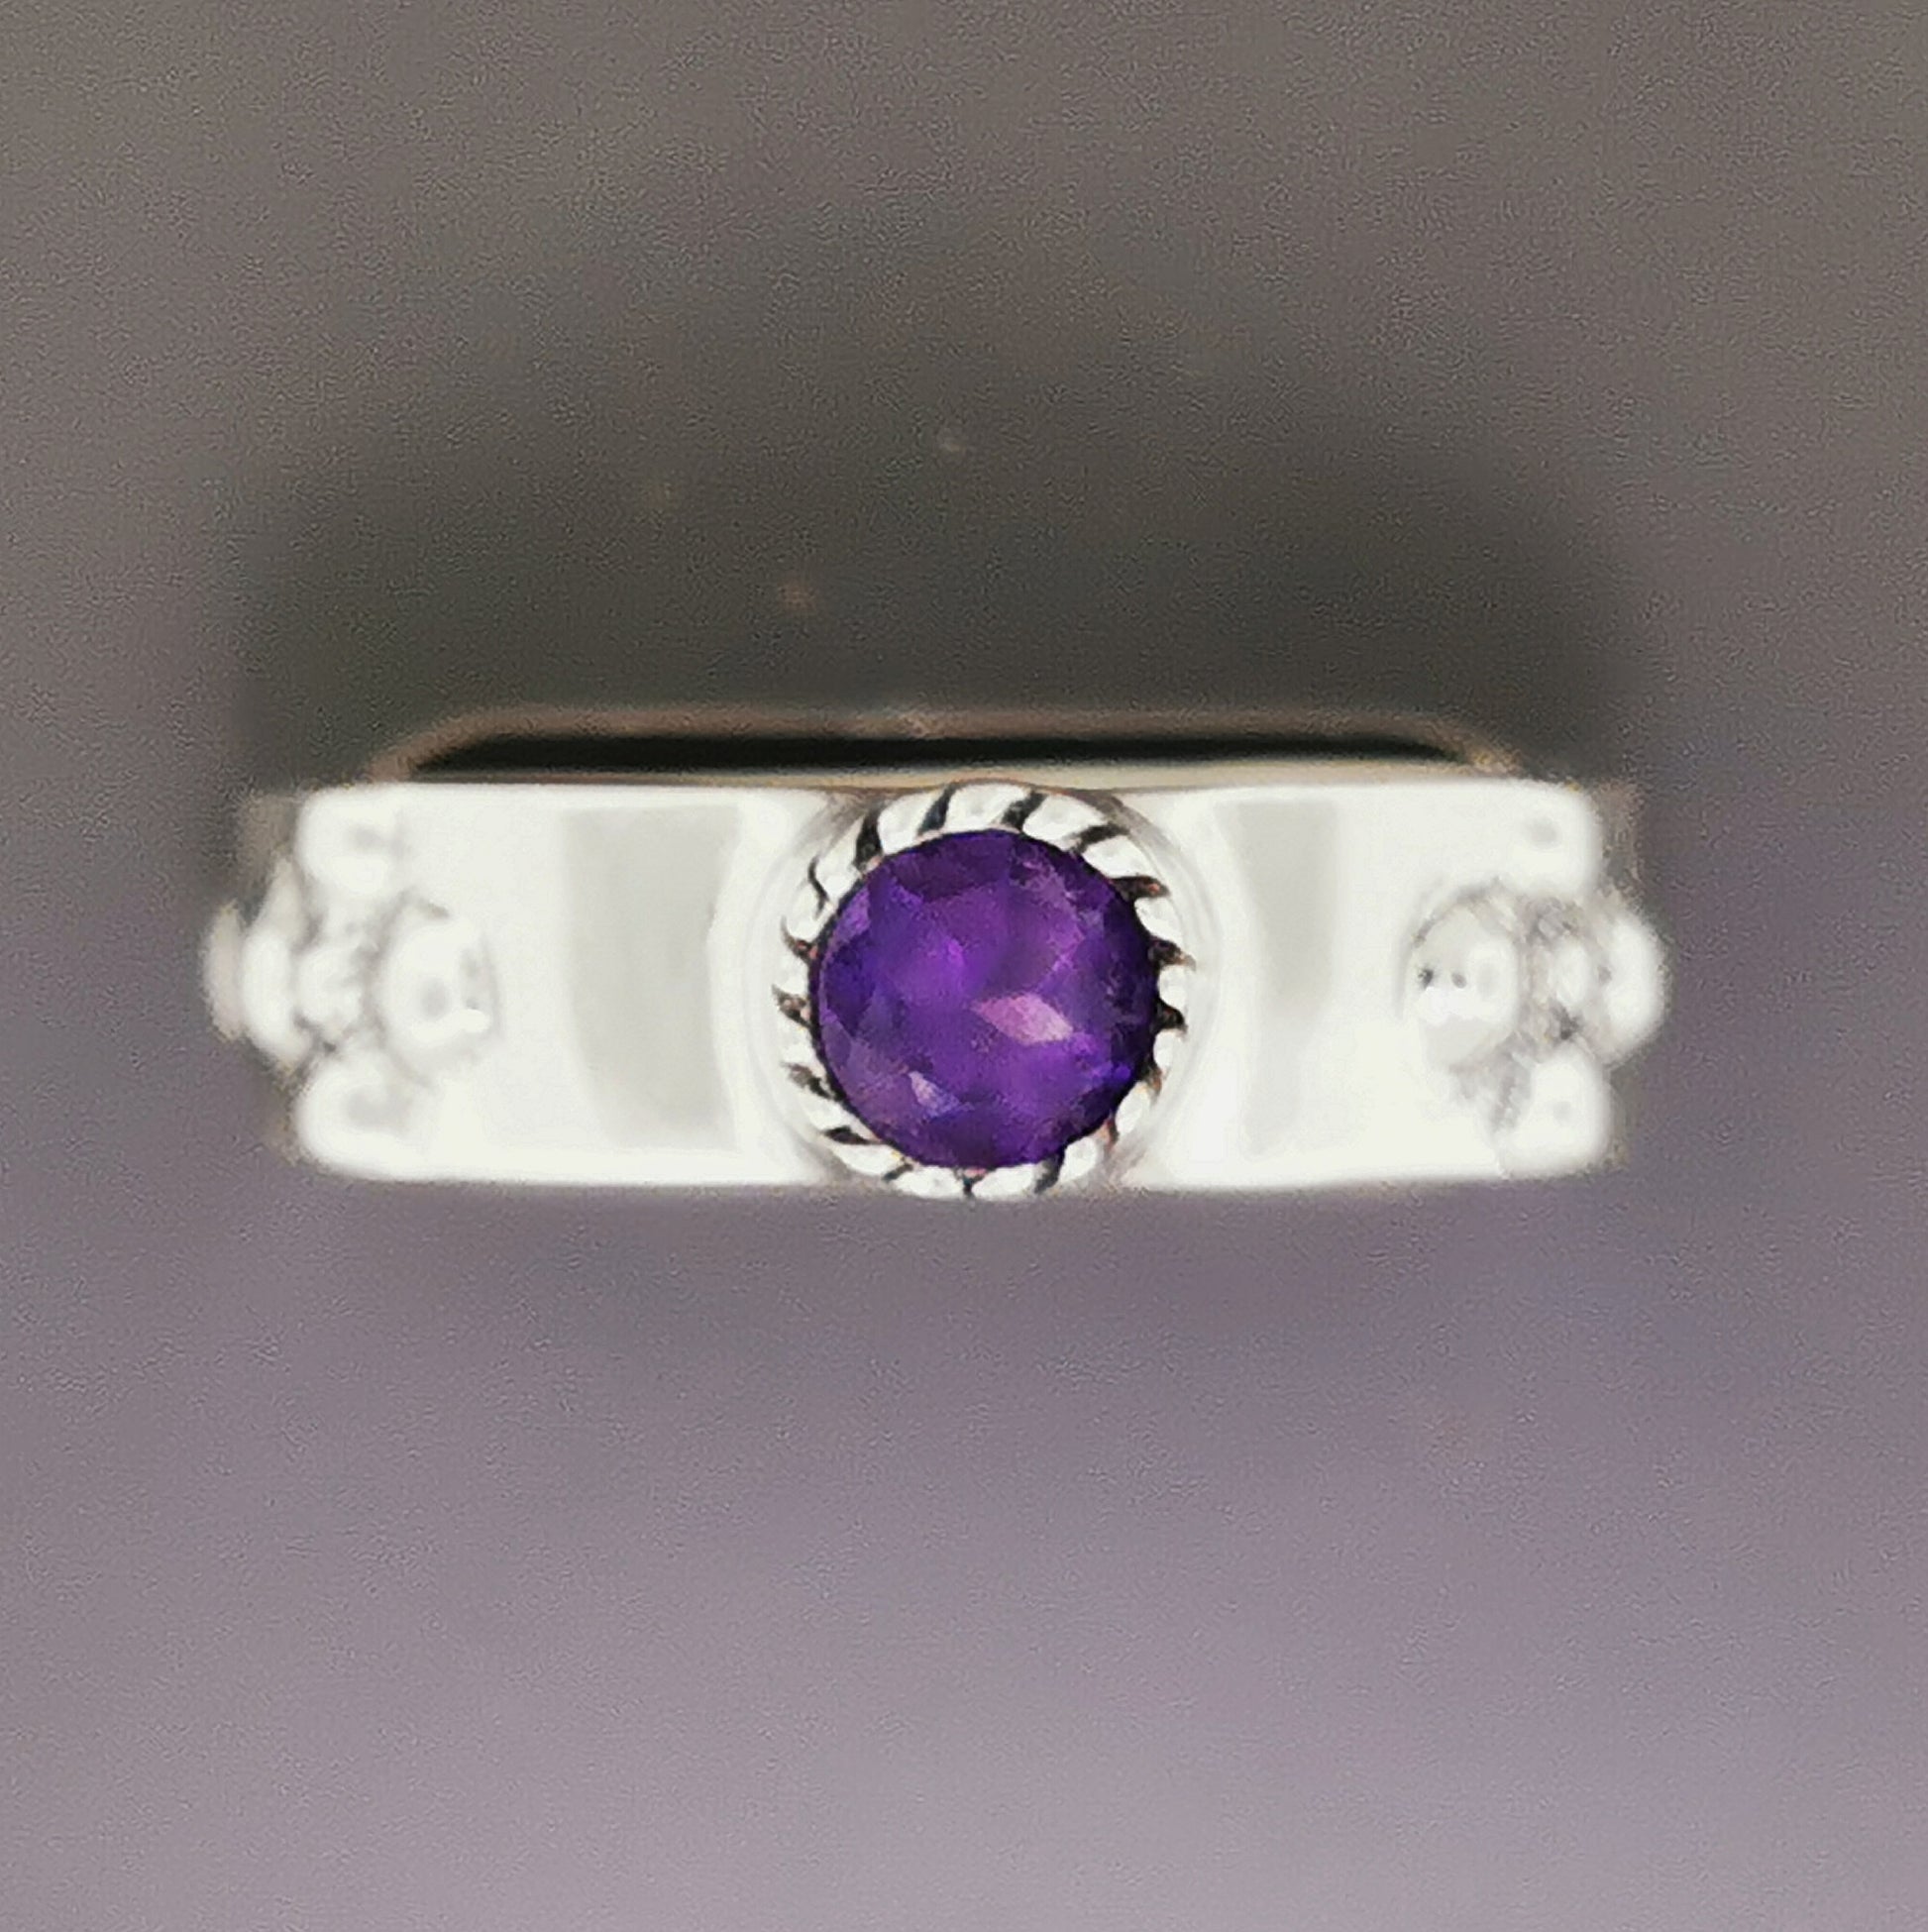 Braidless Howls Moving Castle Ring in Sterling Silver & Natural Gemstone, Howls Moving Castle Engagement Ring Gift, Howl Sophie Ring, Howl's Moving Castle Ring, Anime gemstone ring, Silver Anime Ring, Howl's Moving Castle Wedding Ring